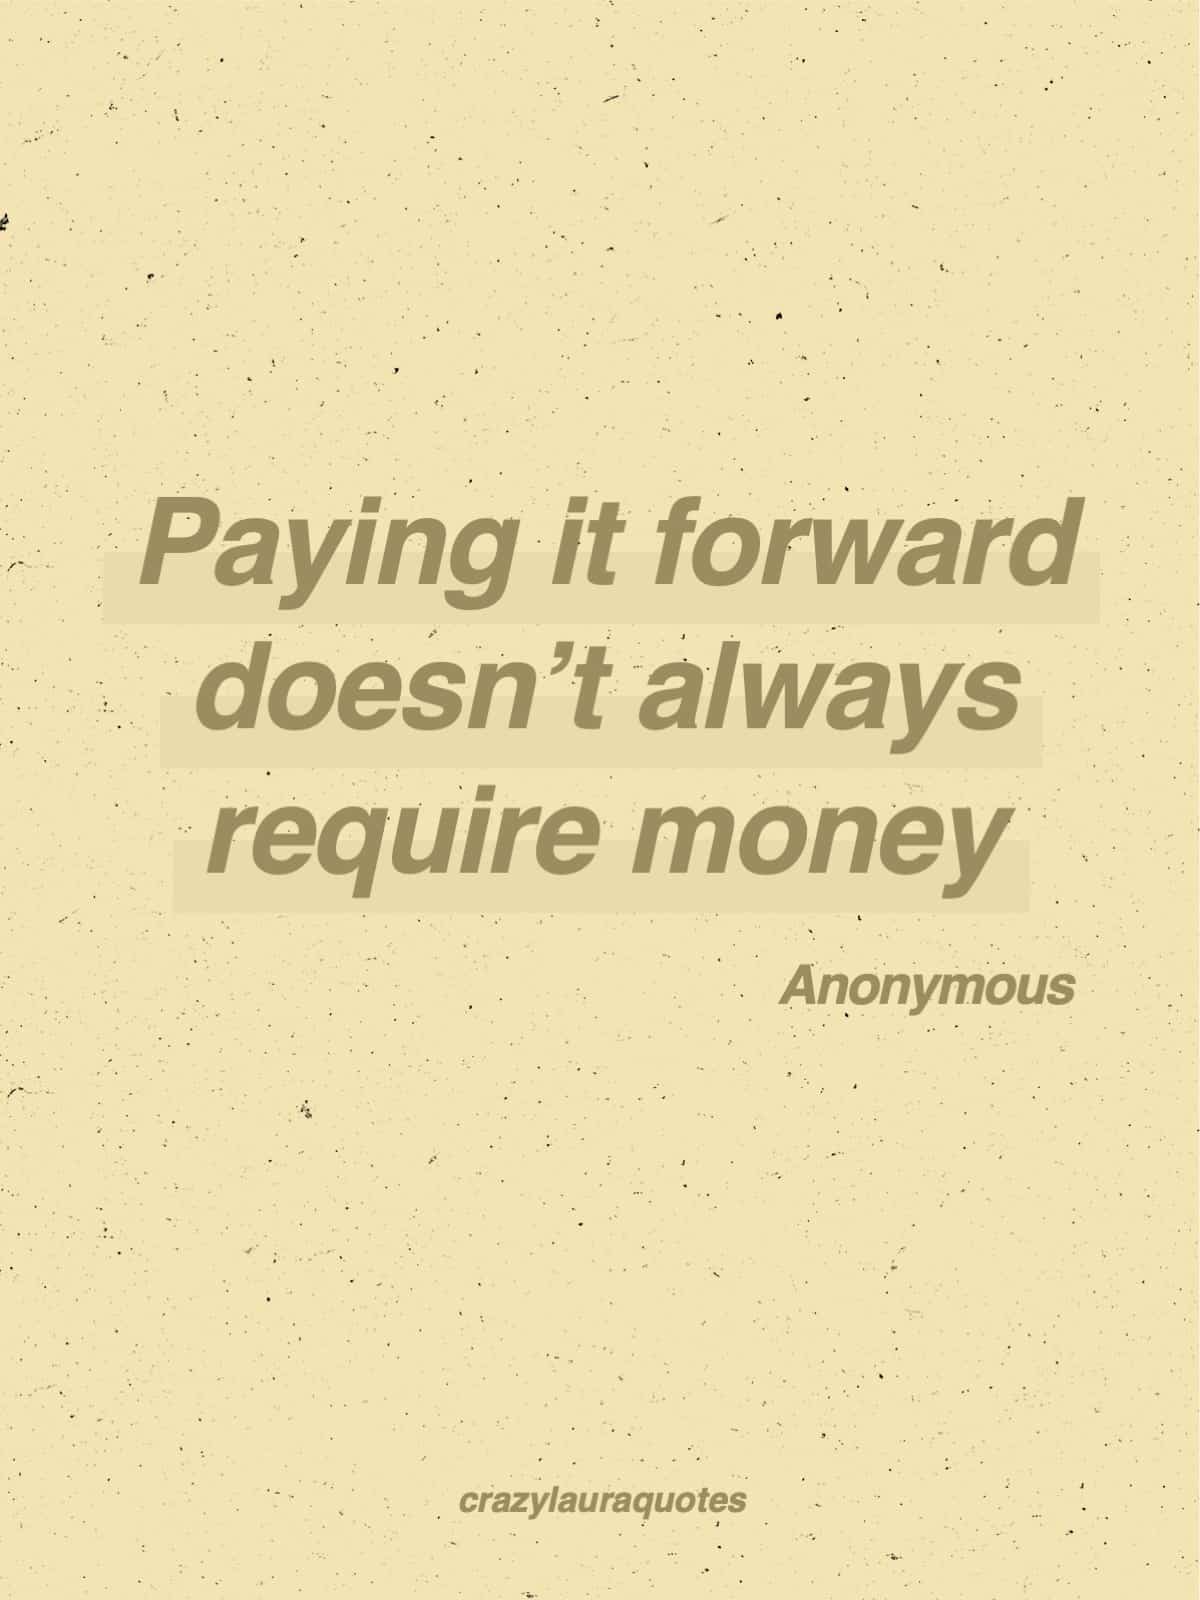 paying it fowards doesnt require money quote